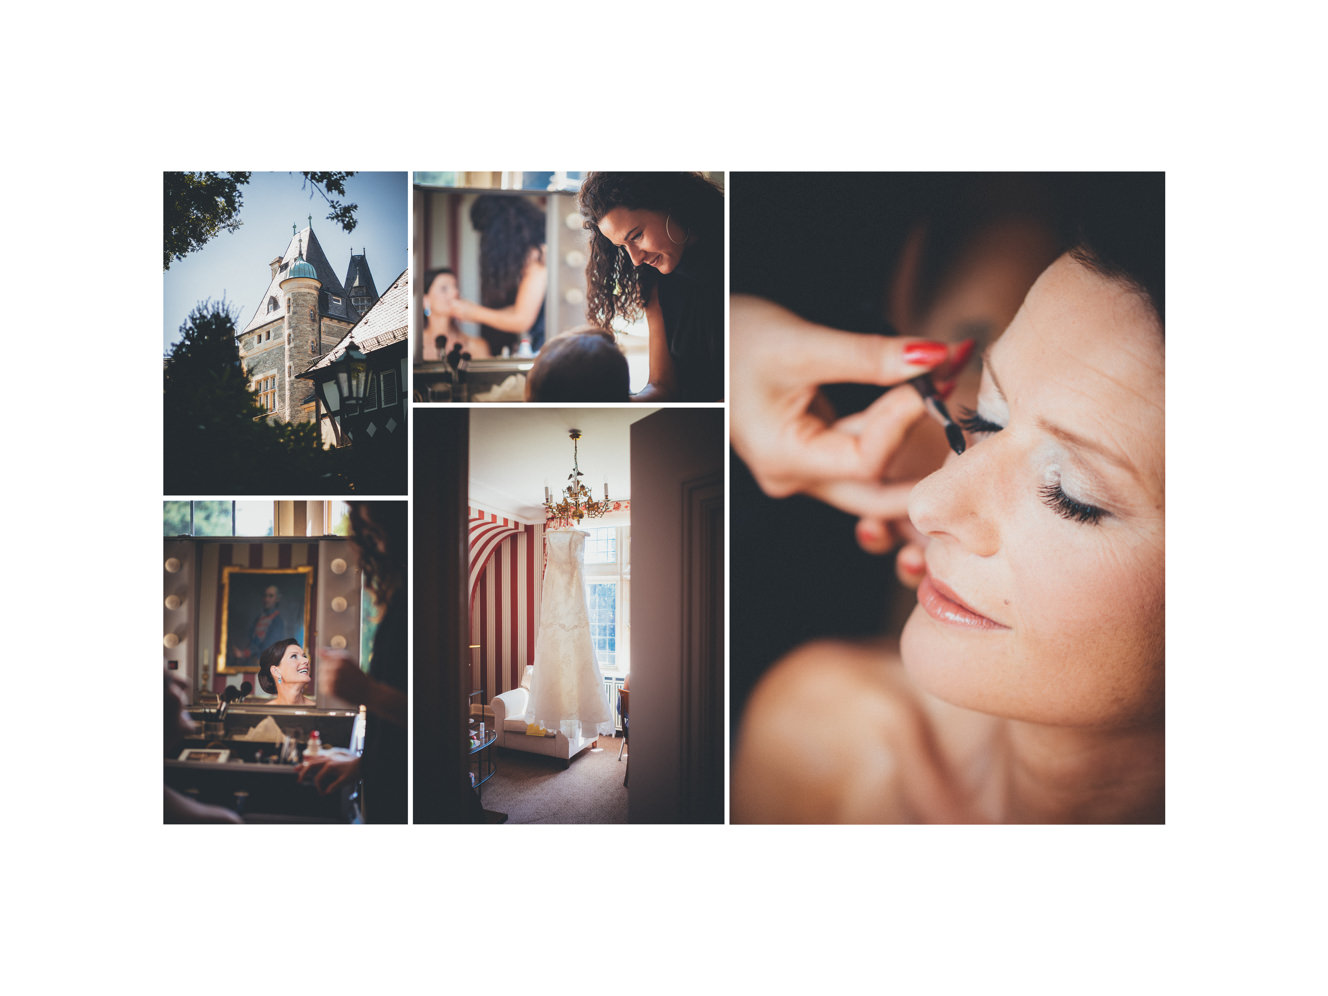 Wedding at Schlosshotel Kronberg - getting ready, church wedding, wedding portraits in the park and a great party